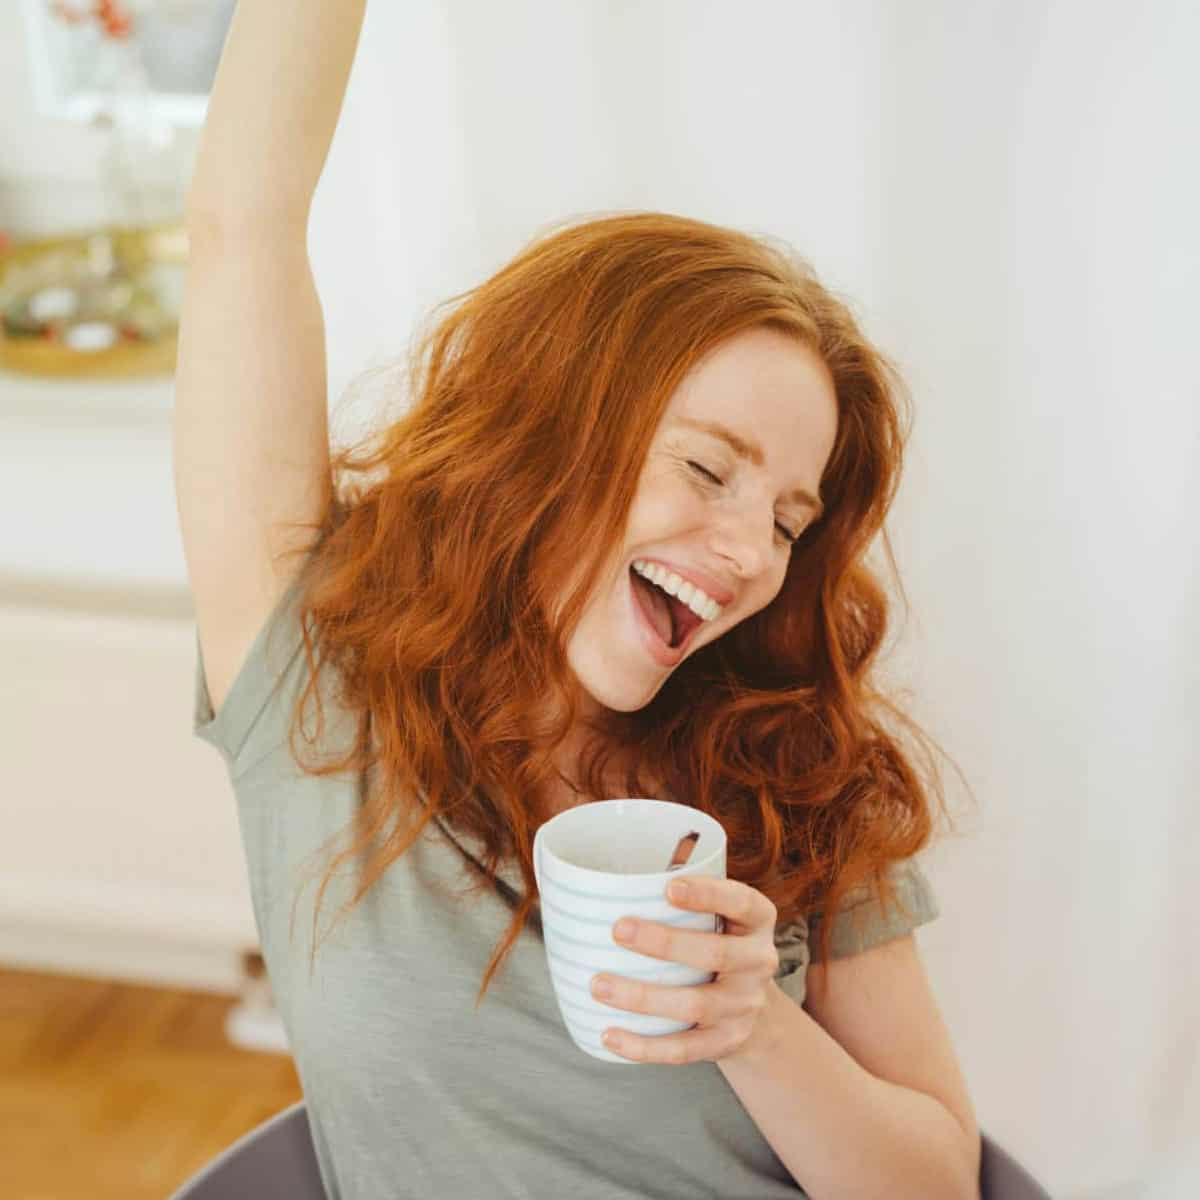 8 Redhead Stereotypes: Are These True?